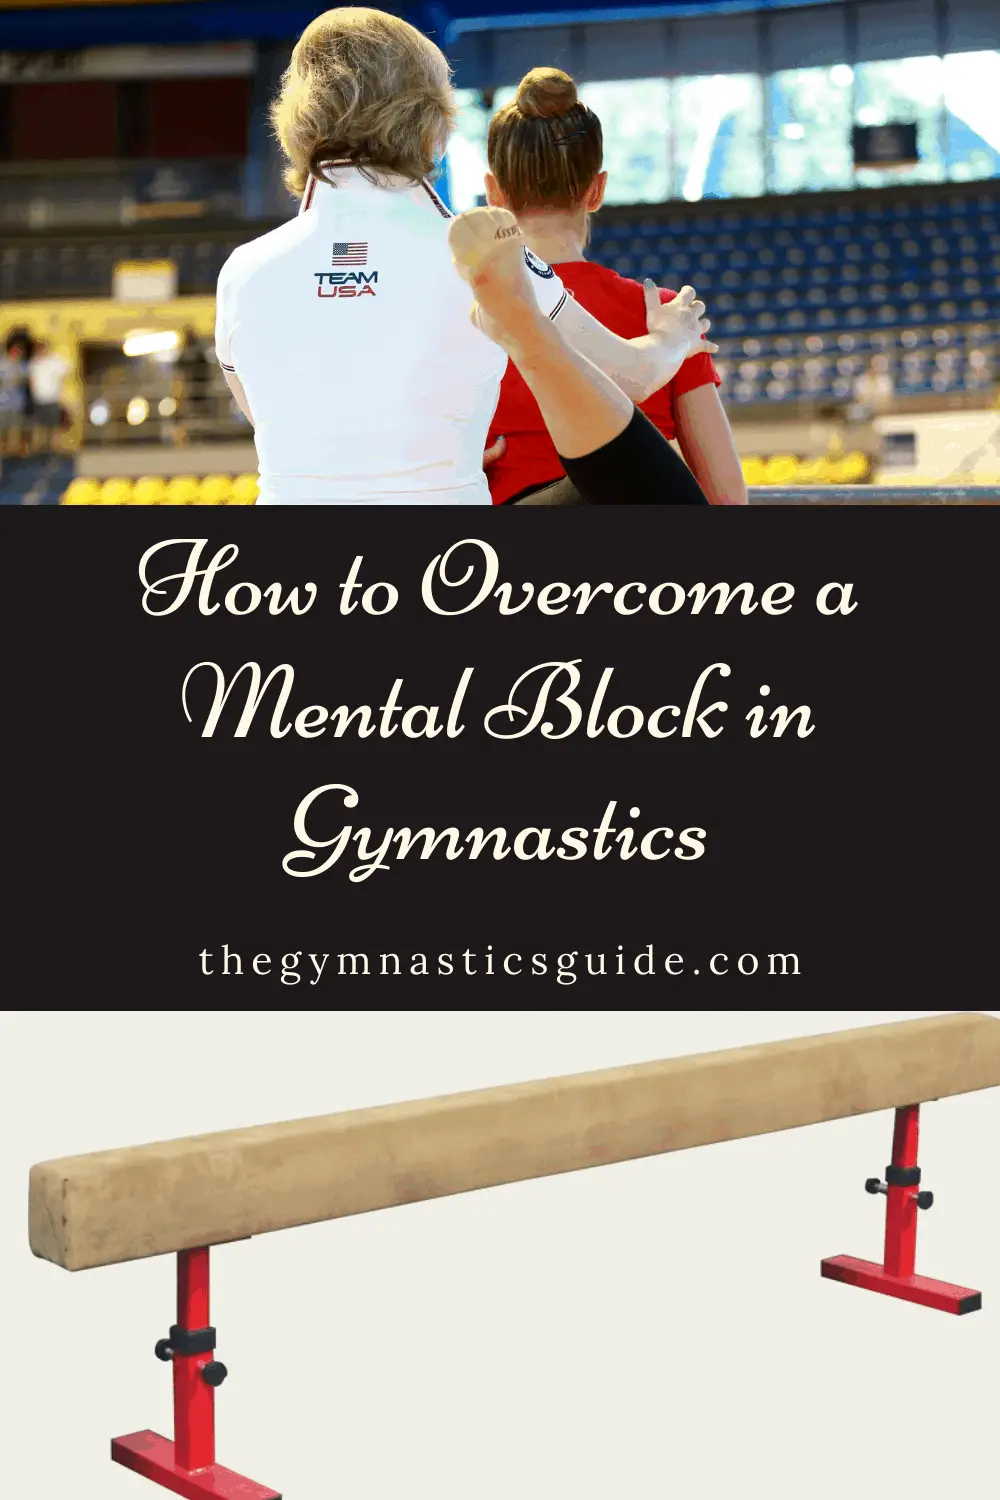 How to Overcome a Mental Block in Gymnastics